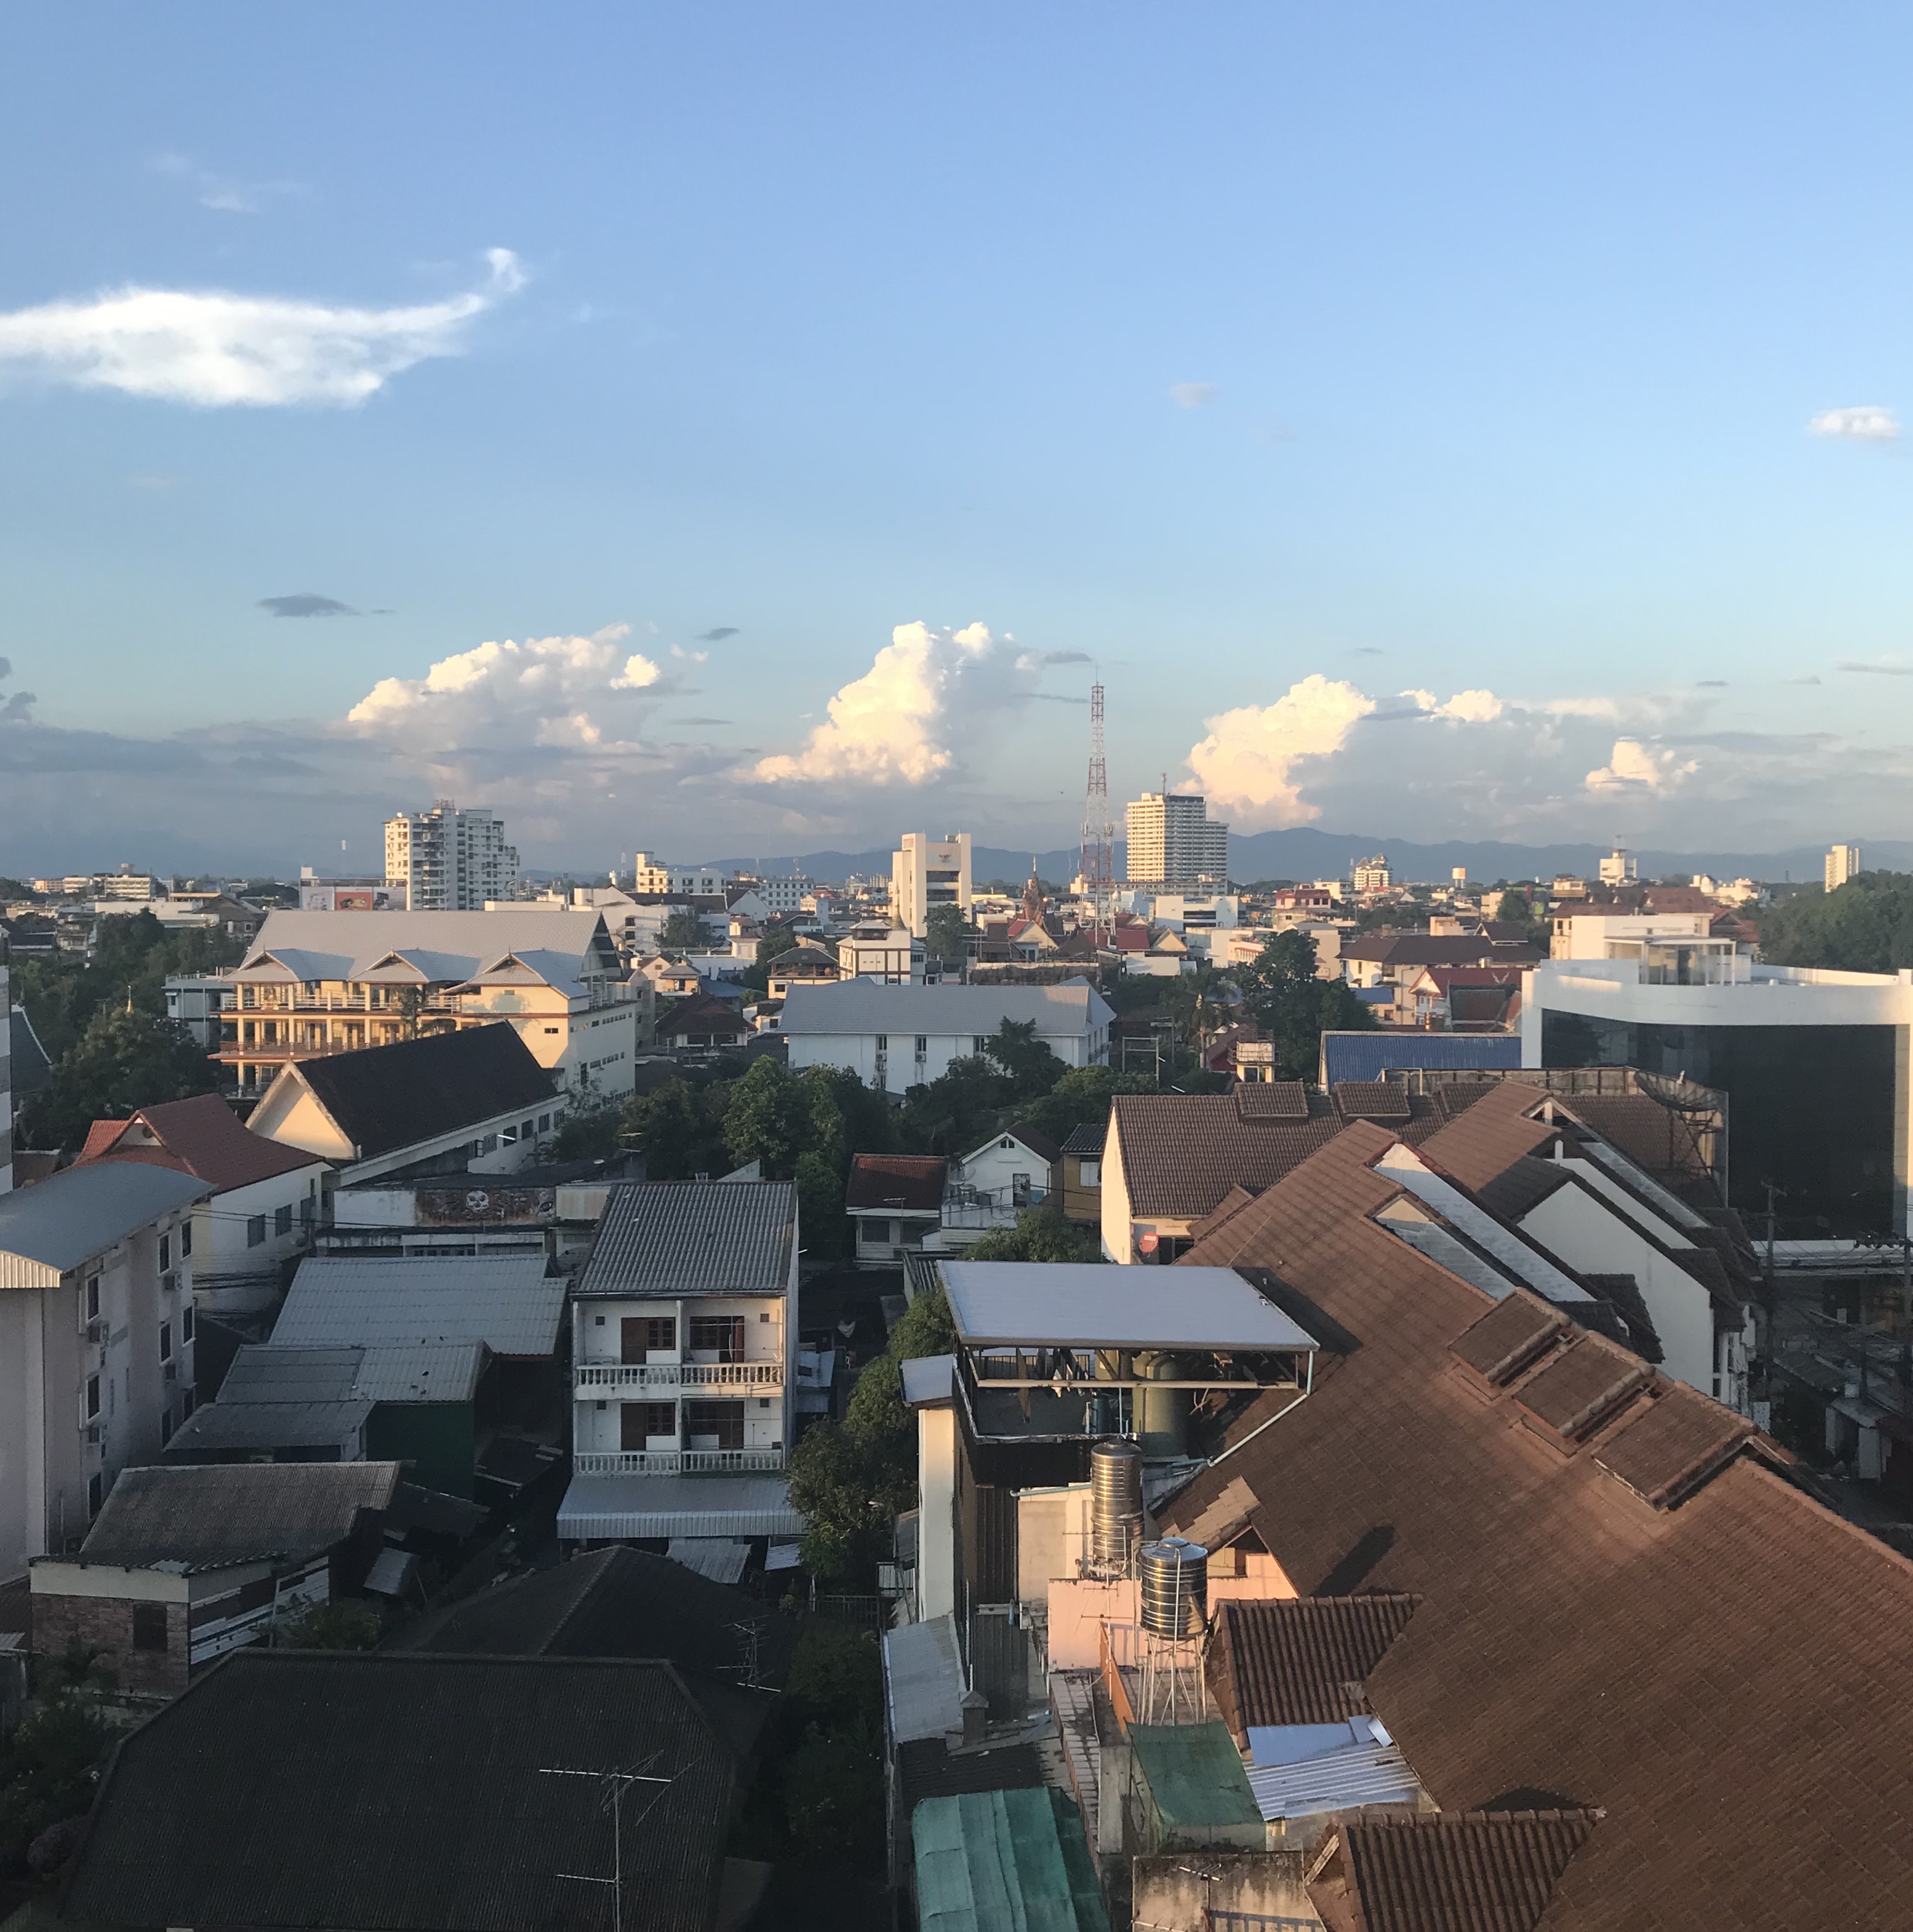 10 Things That Surprised Me About Chiang Mai